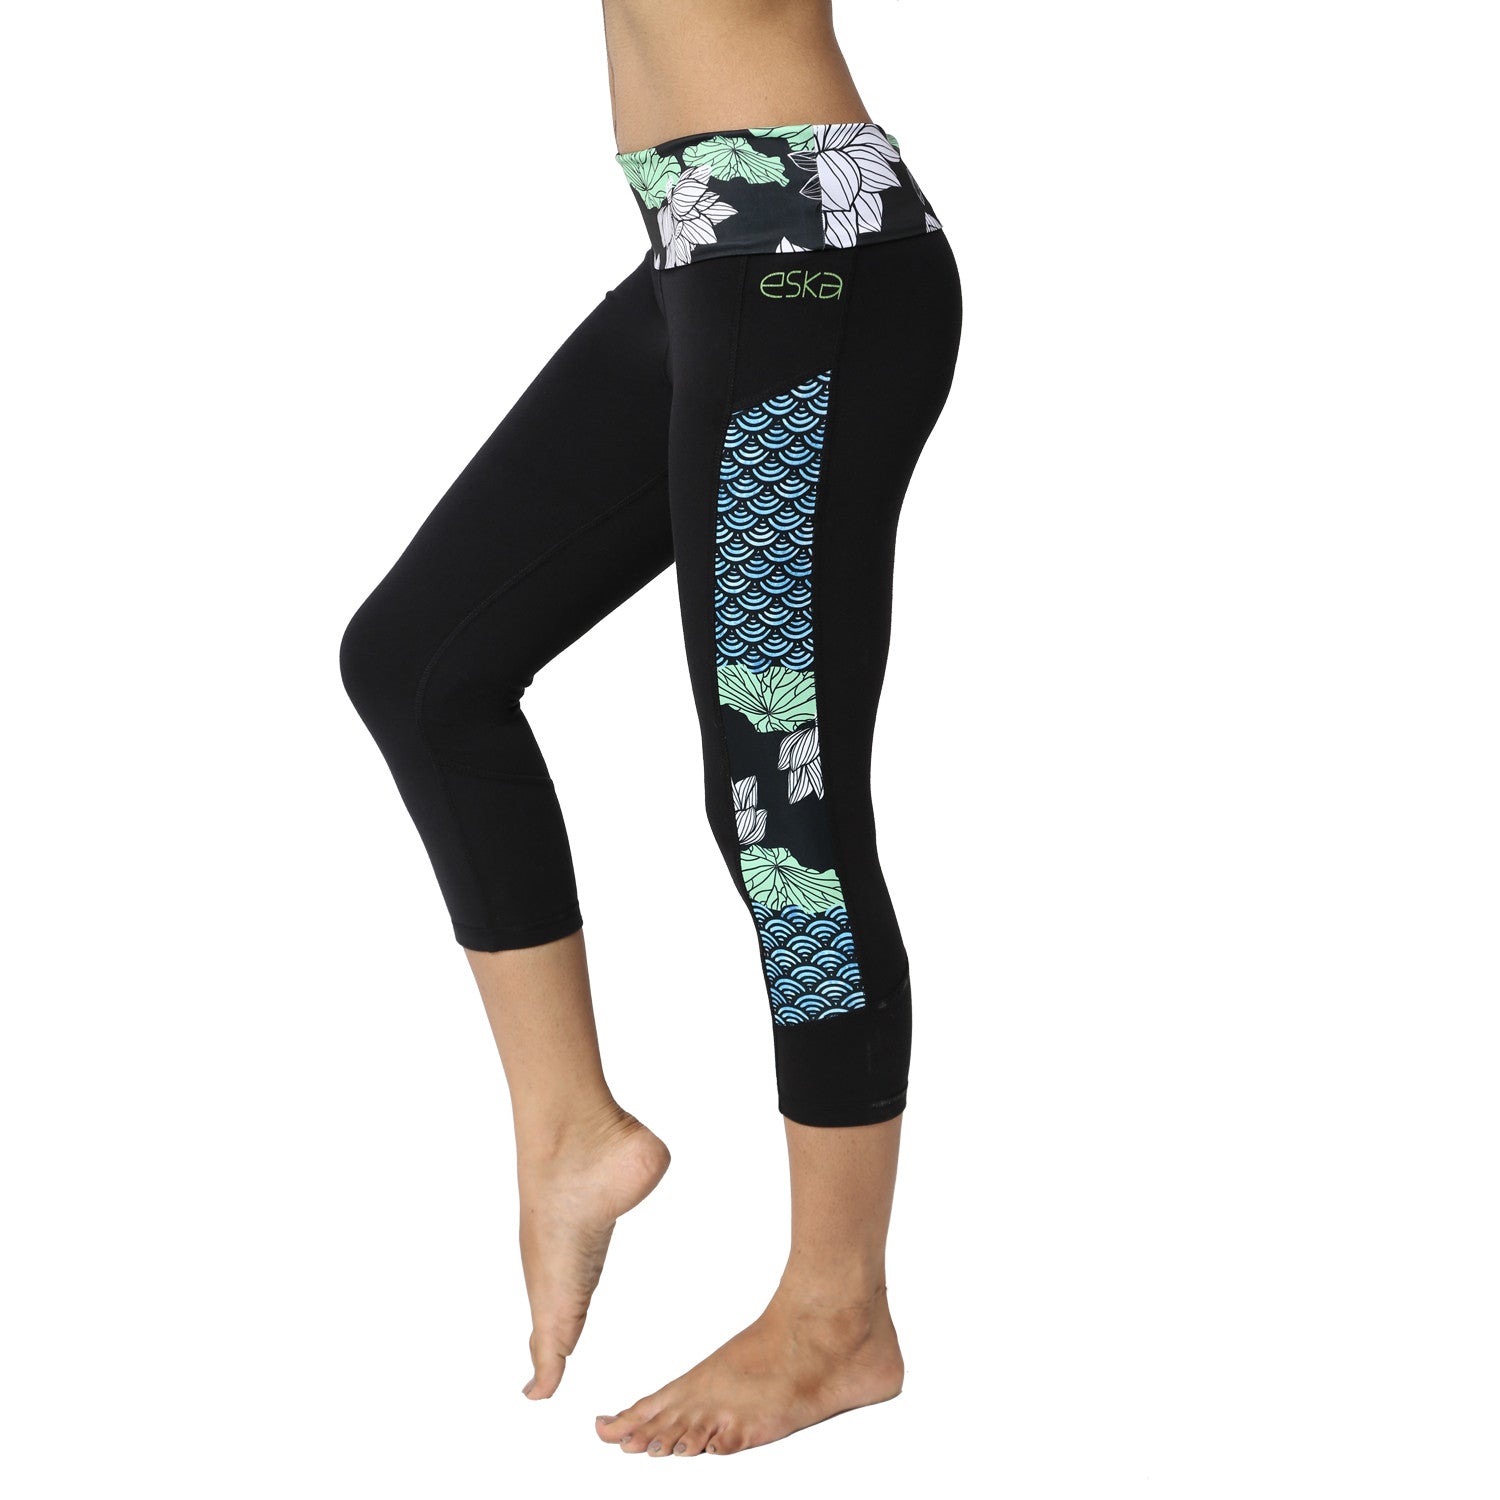 Tried and Tested: Lorna Jane Lotus leggings review | Checkout – Best Deals,  Expert Product Reviews & Buying Guides